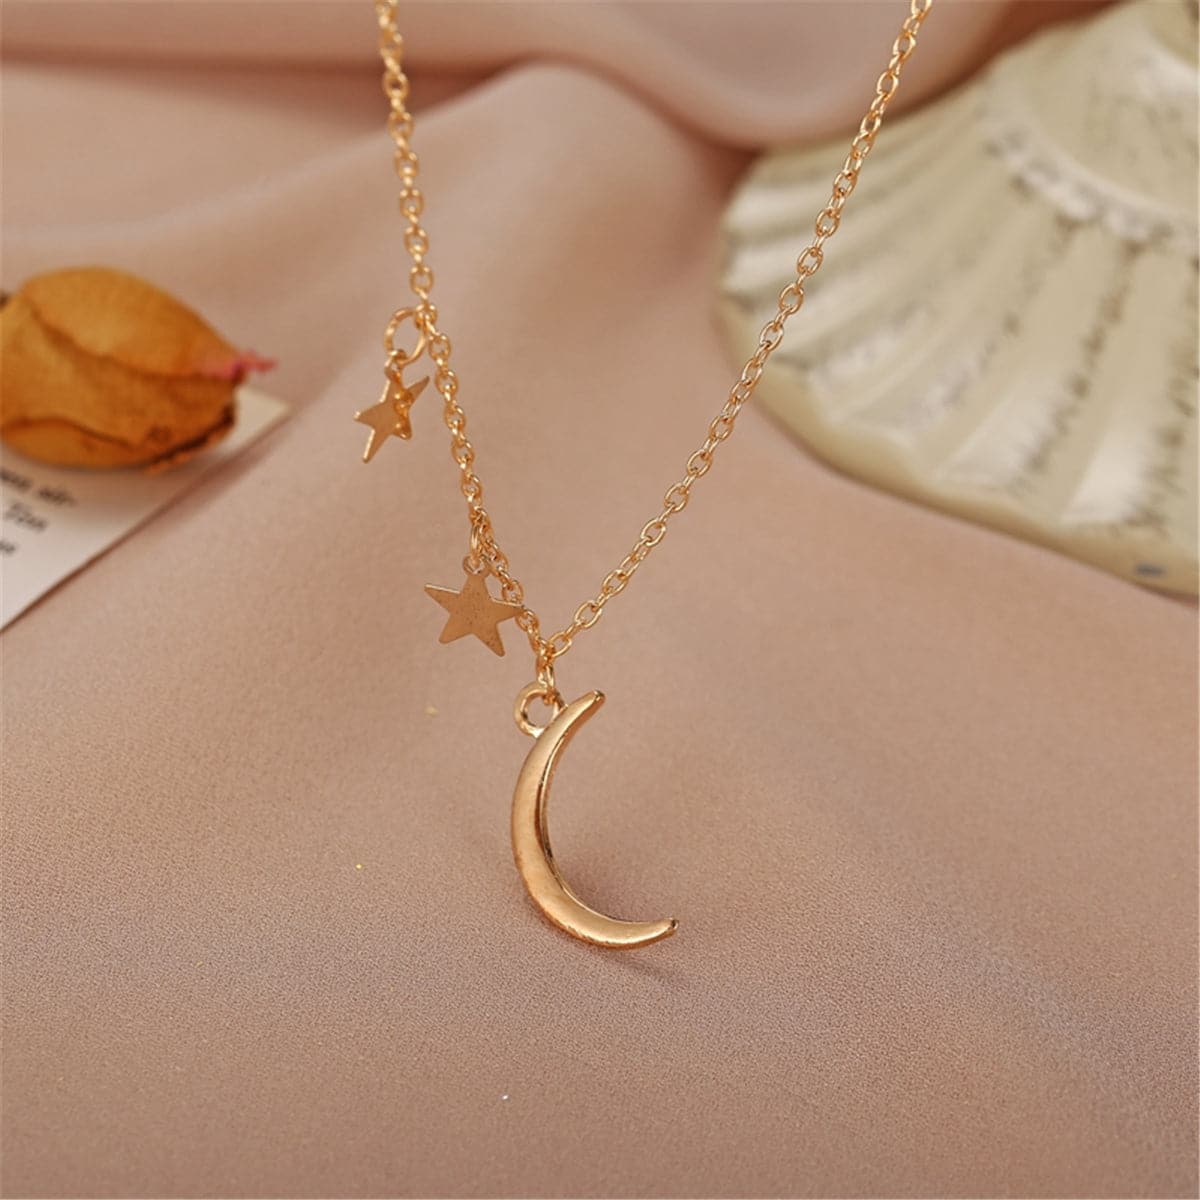 18K Gold-Plated Moon & Star Pendant Necklace